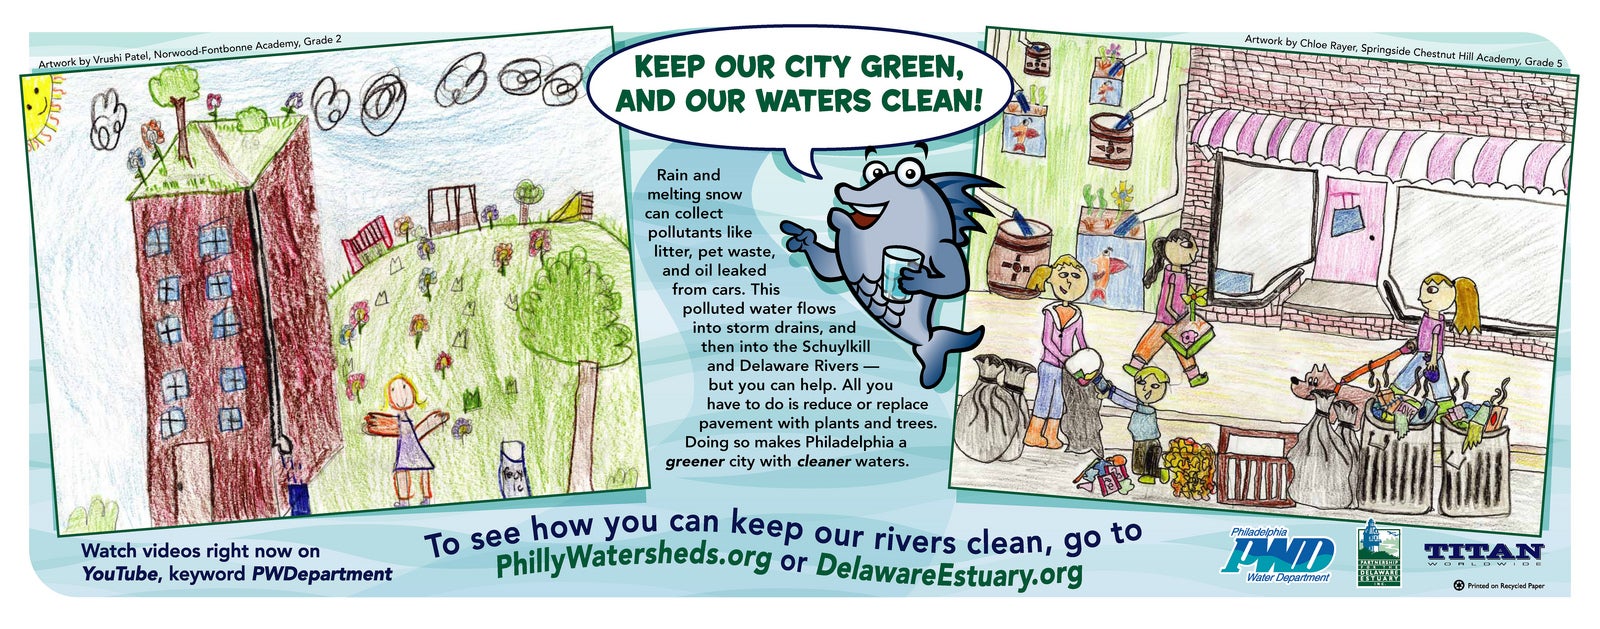 SEPTA ad from 2013 Green City, Clean Waters Art Contest